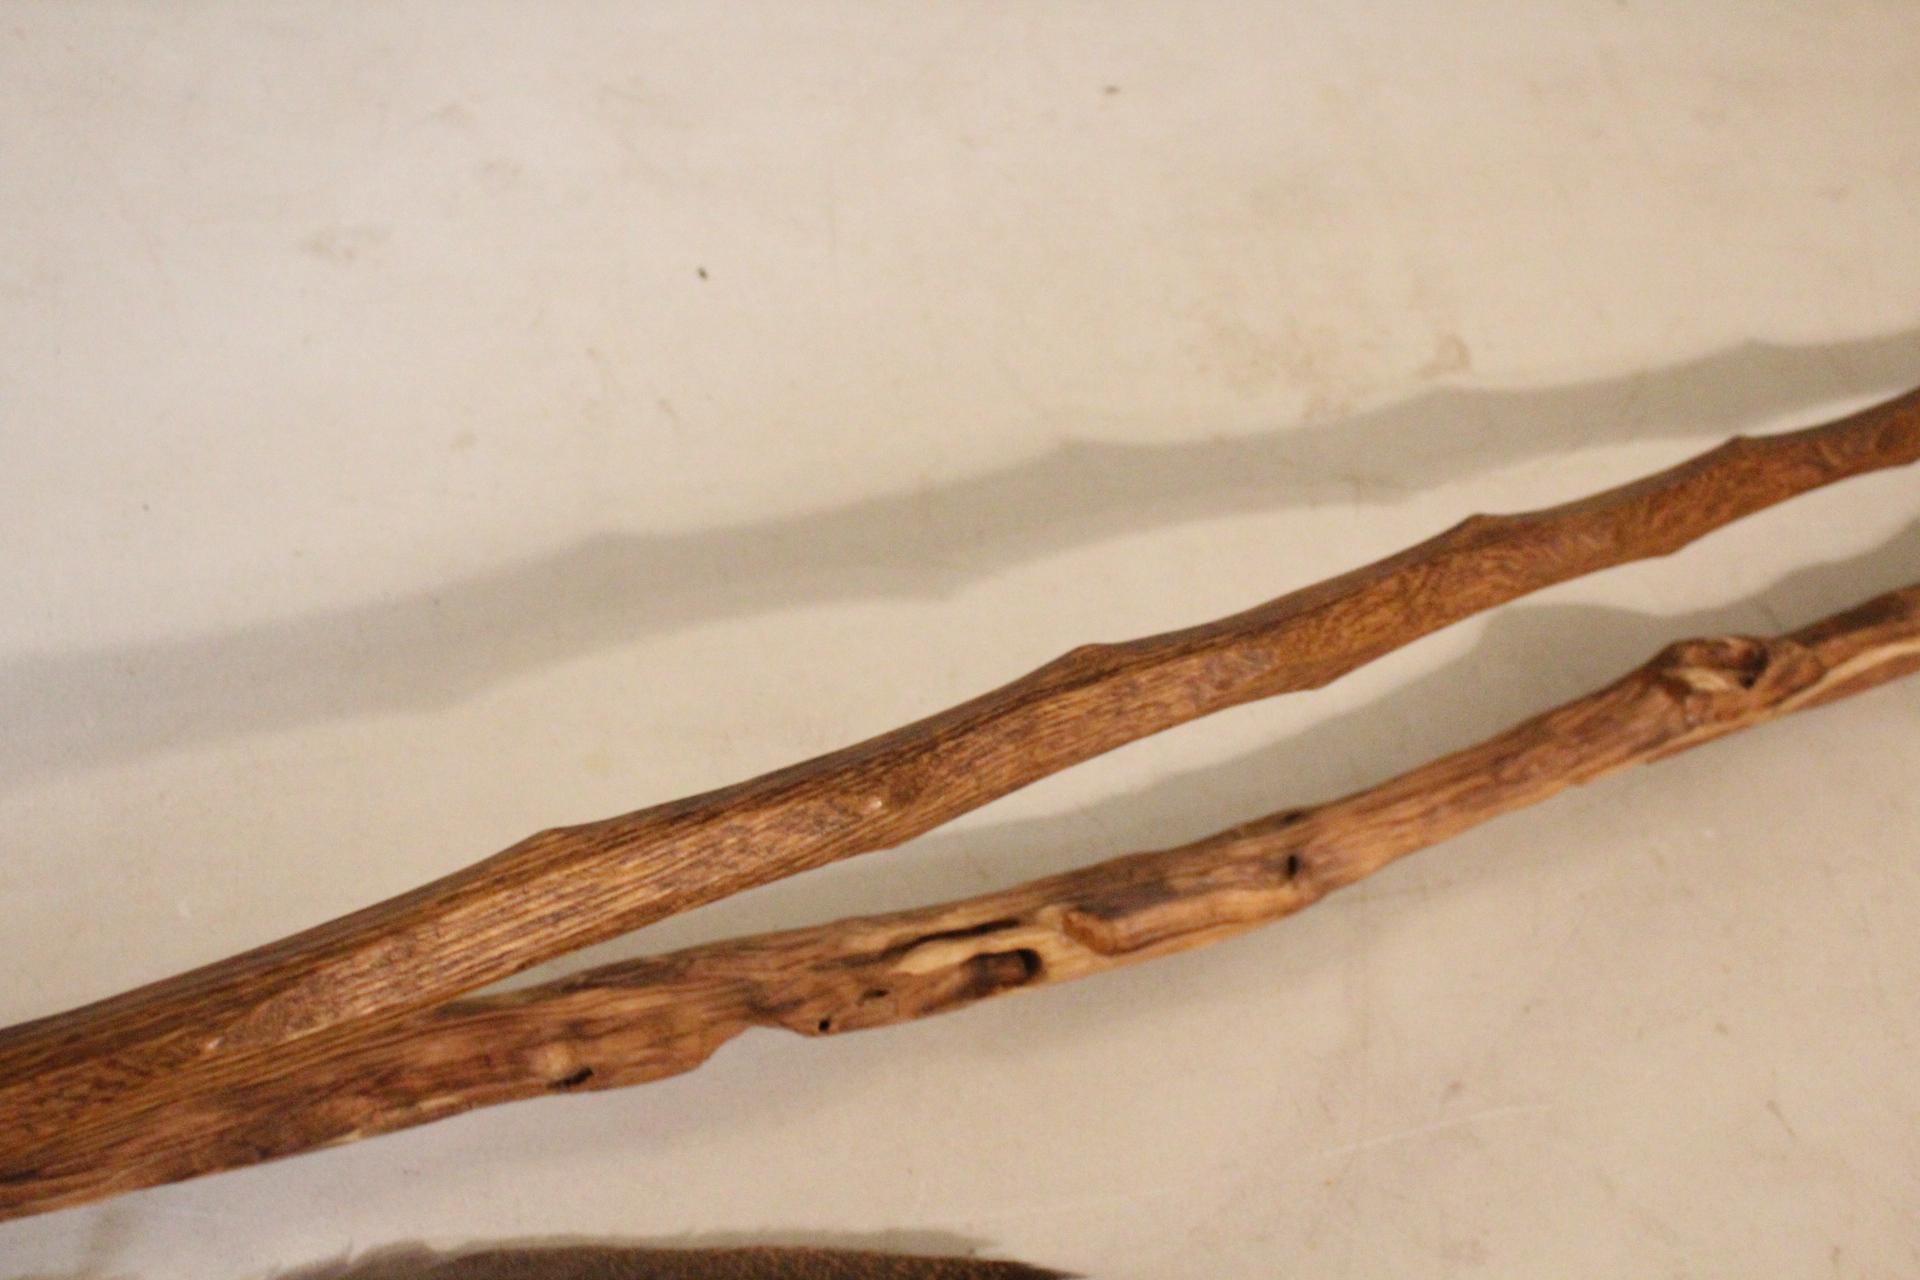 2 Walking Sticks One is Handcrafted Diamond Willow Measures 49" Tall Other